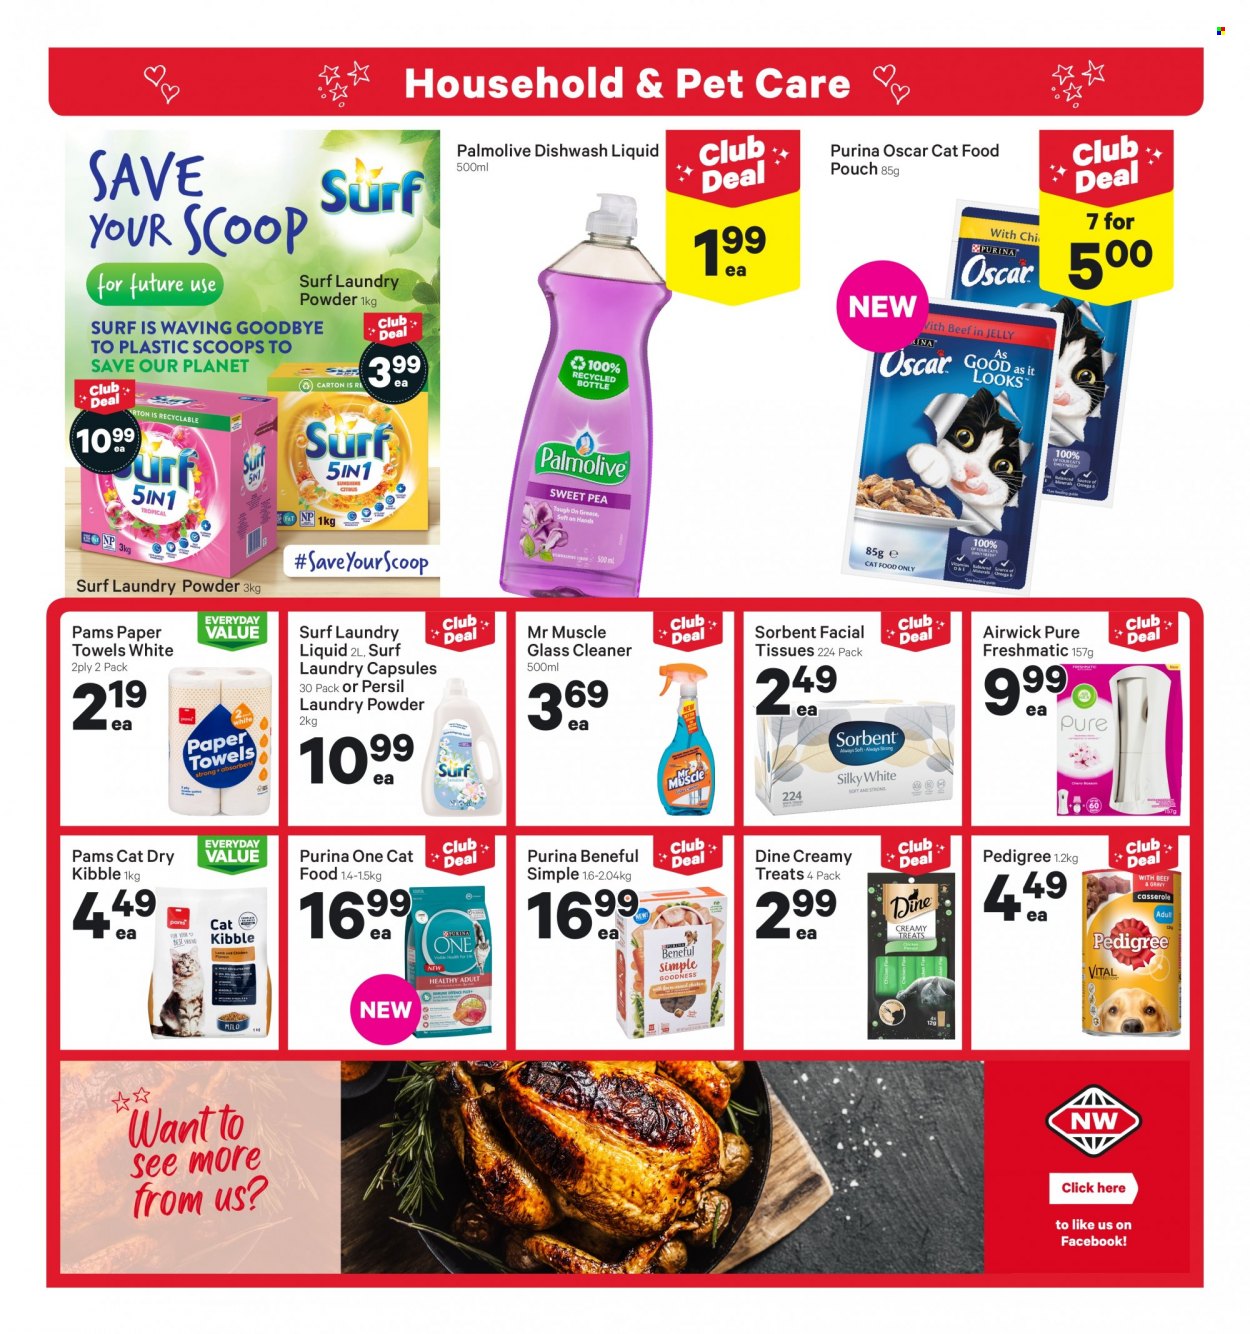 thumbnail - New World mailer - 16.05.2022 - 22.05.2022 - Sales products - tissues, kitchen towels, paper towels, cleaner, glass cleaner, Mr. Muscle, Persil, laundry detergent, laundry powder, laundry capsules, Surf, dishwashing liquid, Palmolive, facial tissues, Air Wick, animal food, cat food, Purina, Pedigree. Page 17.